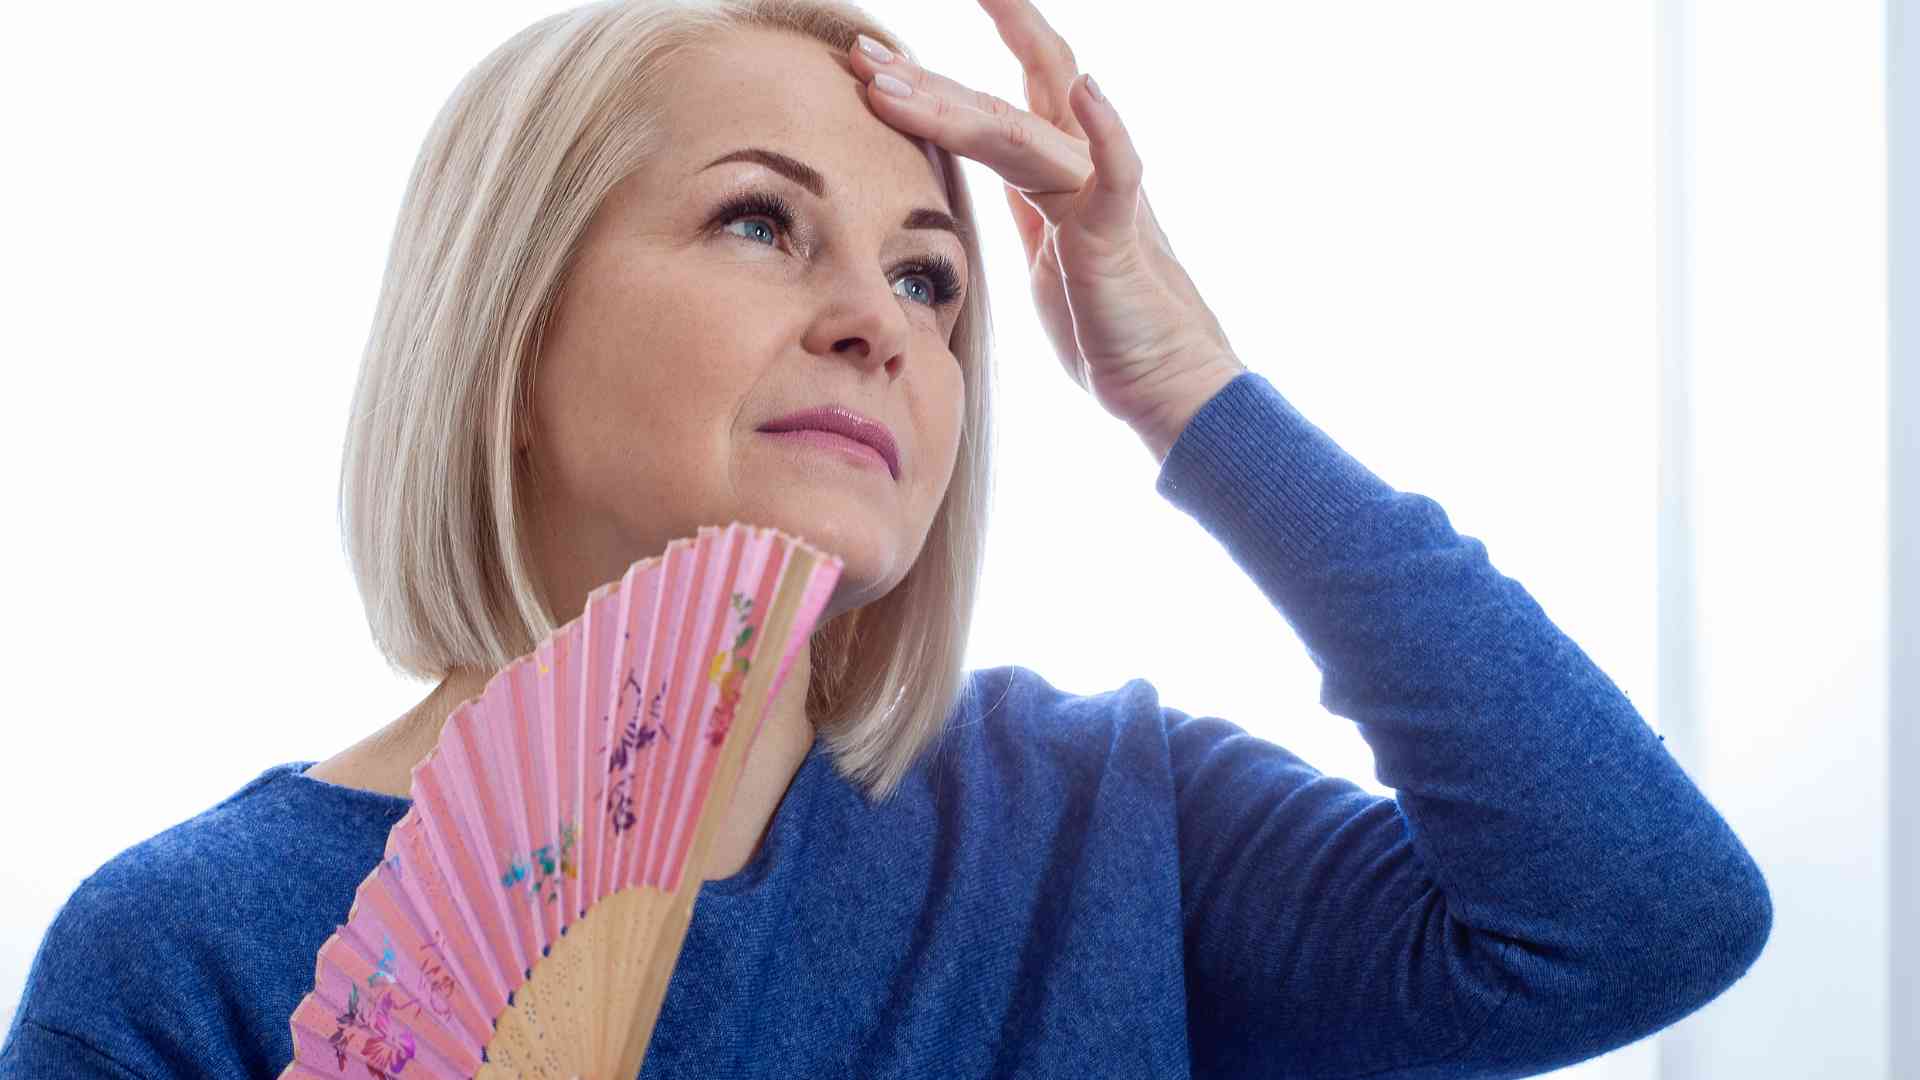 How does menopause impact hair loss in women